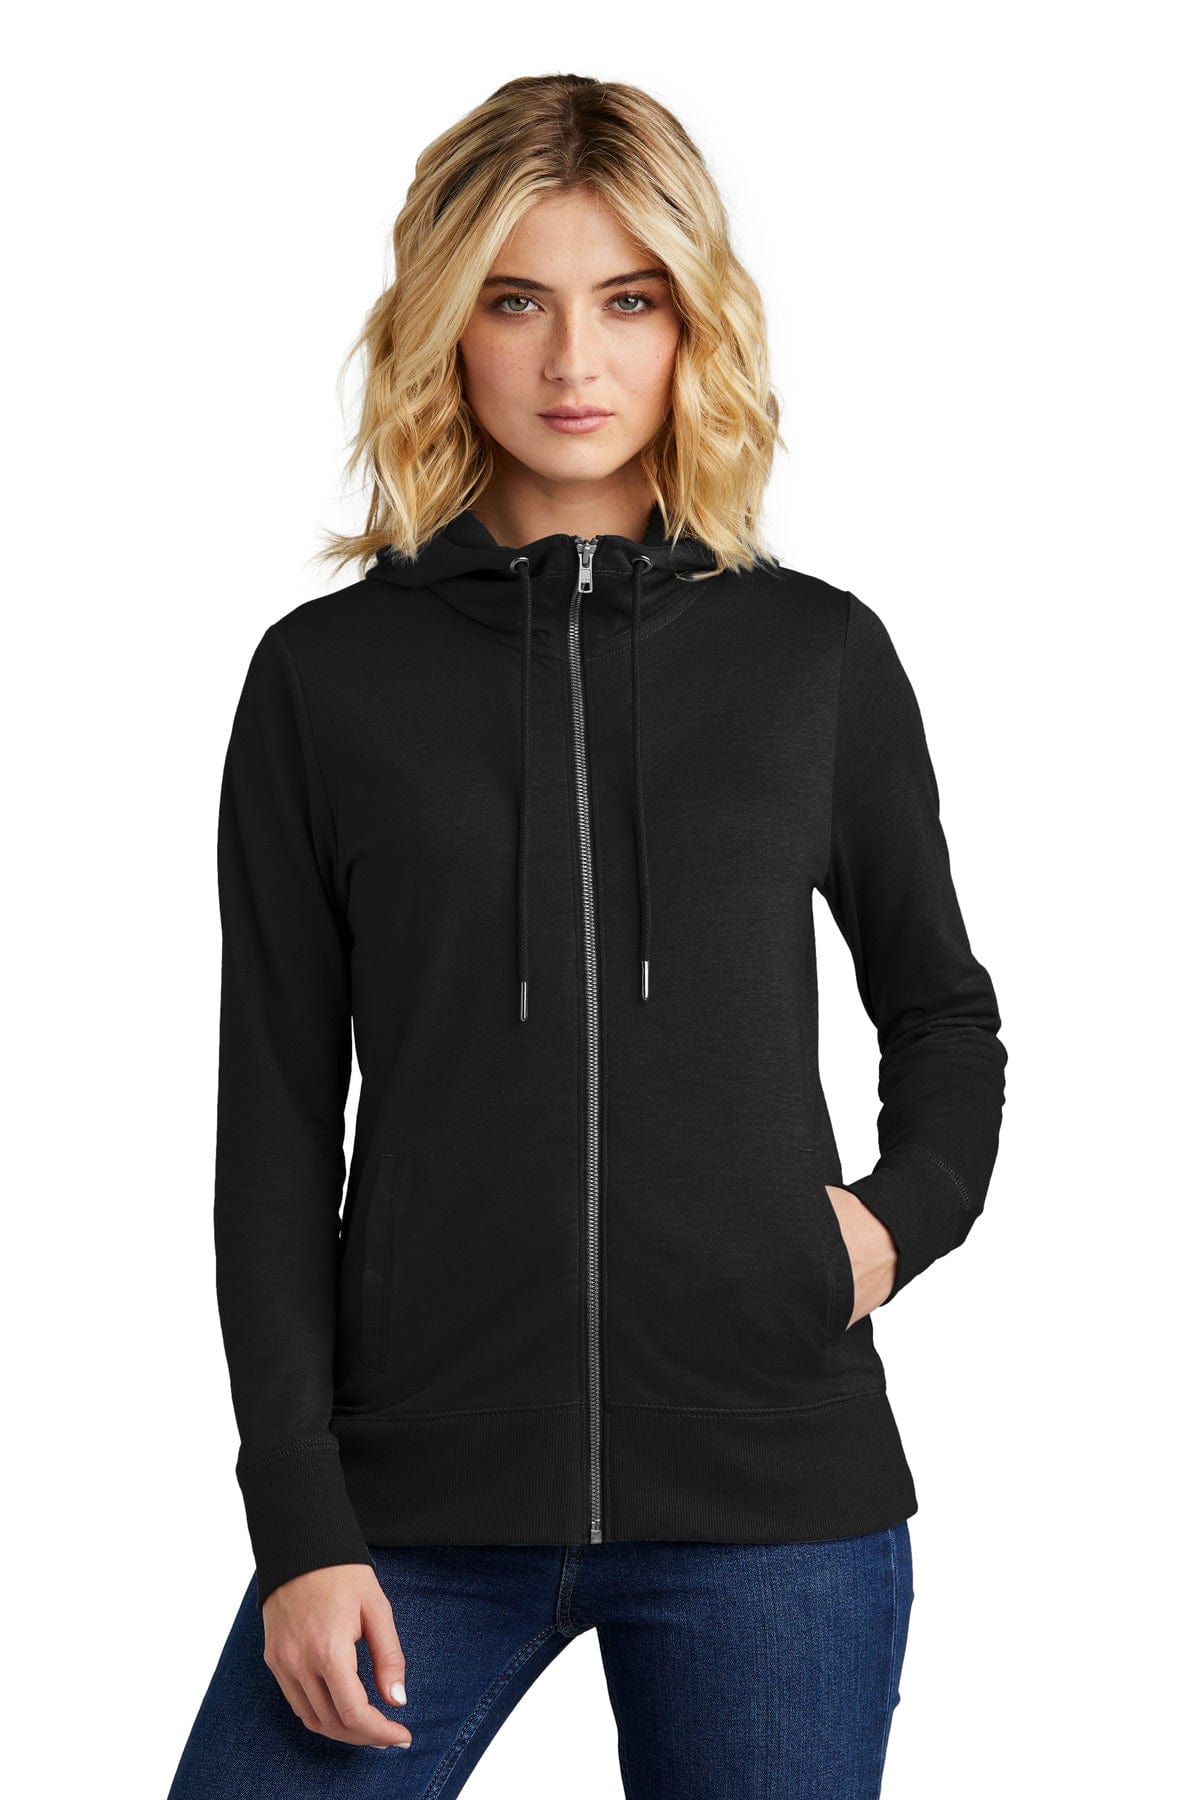 District DT673: Women's Featherweight French Terry Full-Zip Hoodie